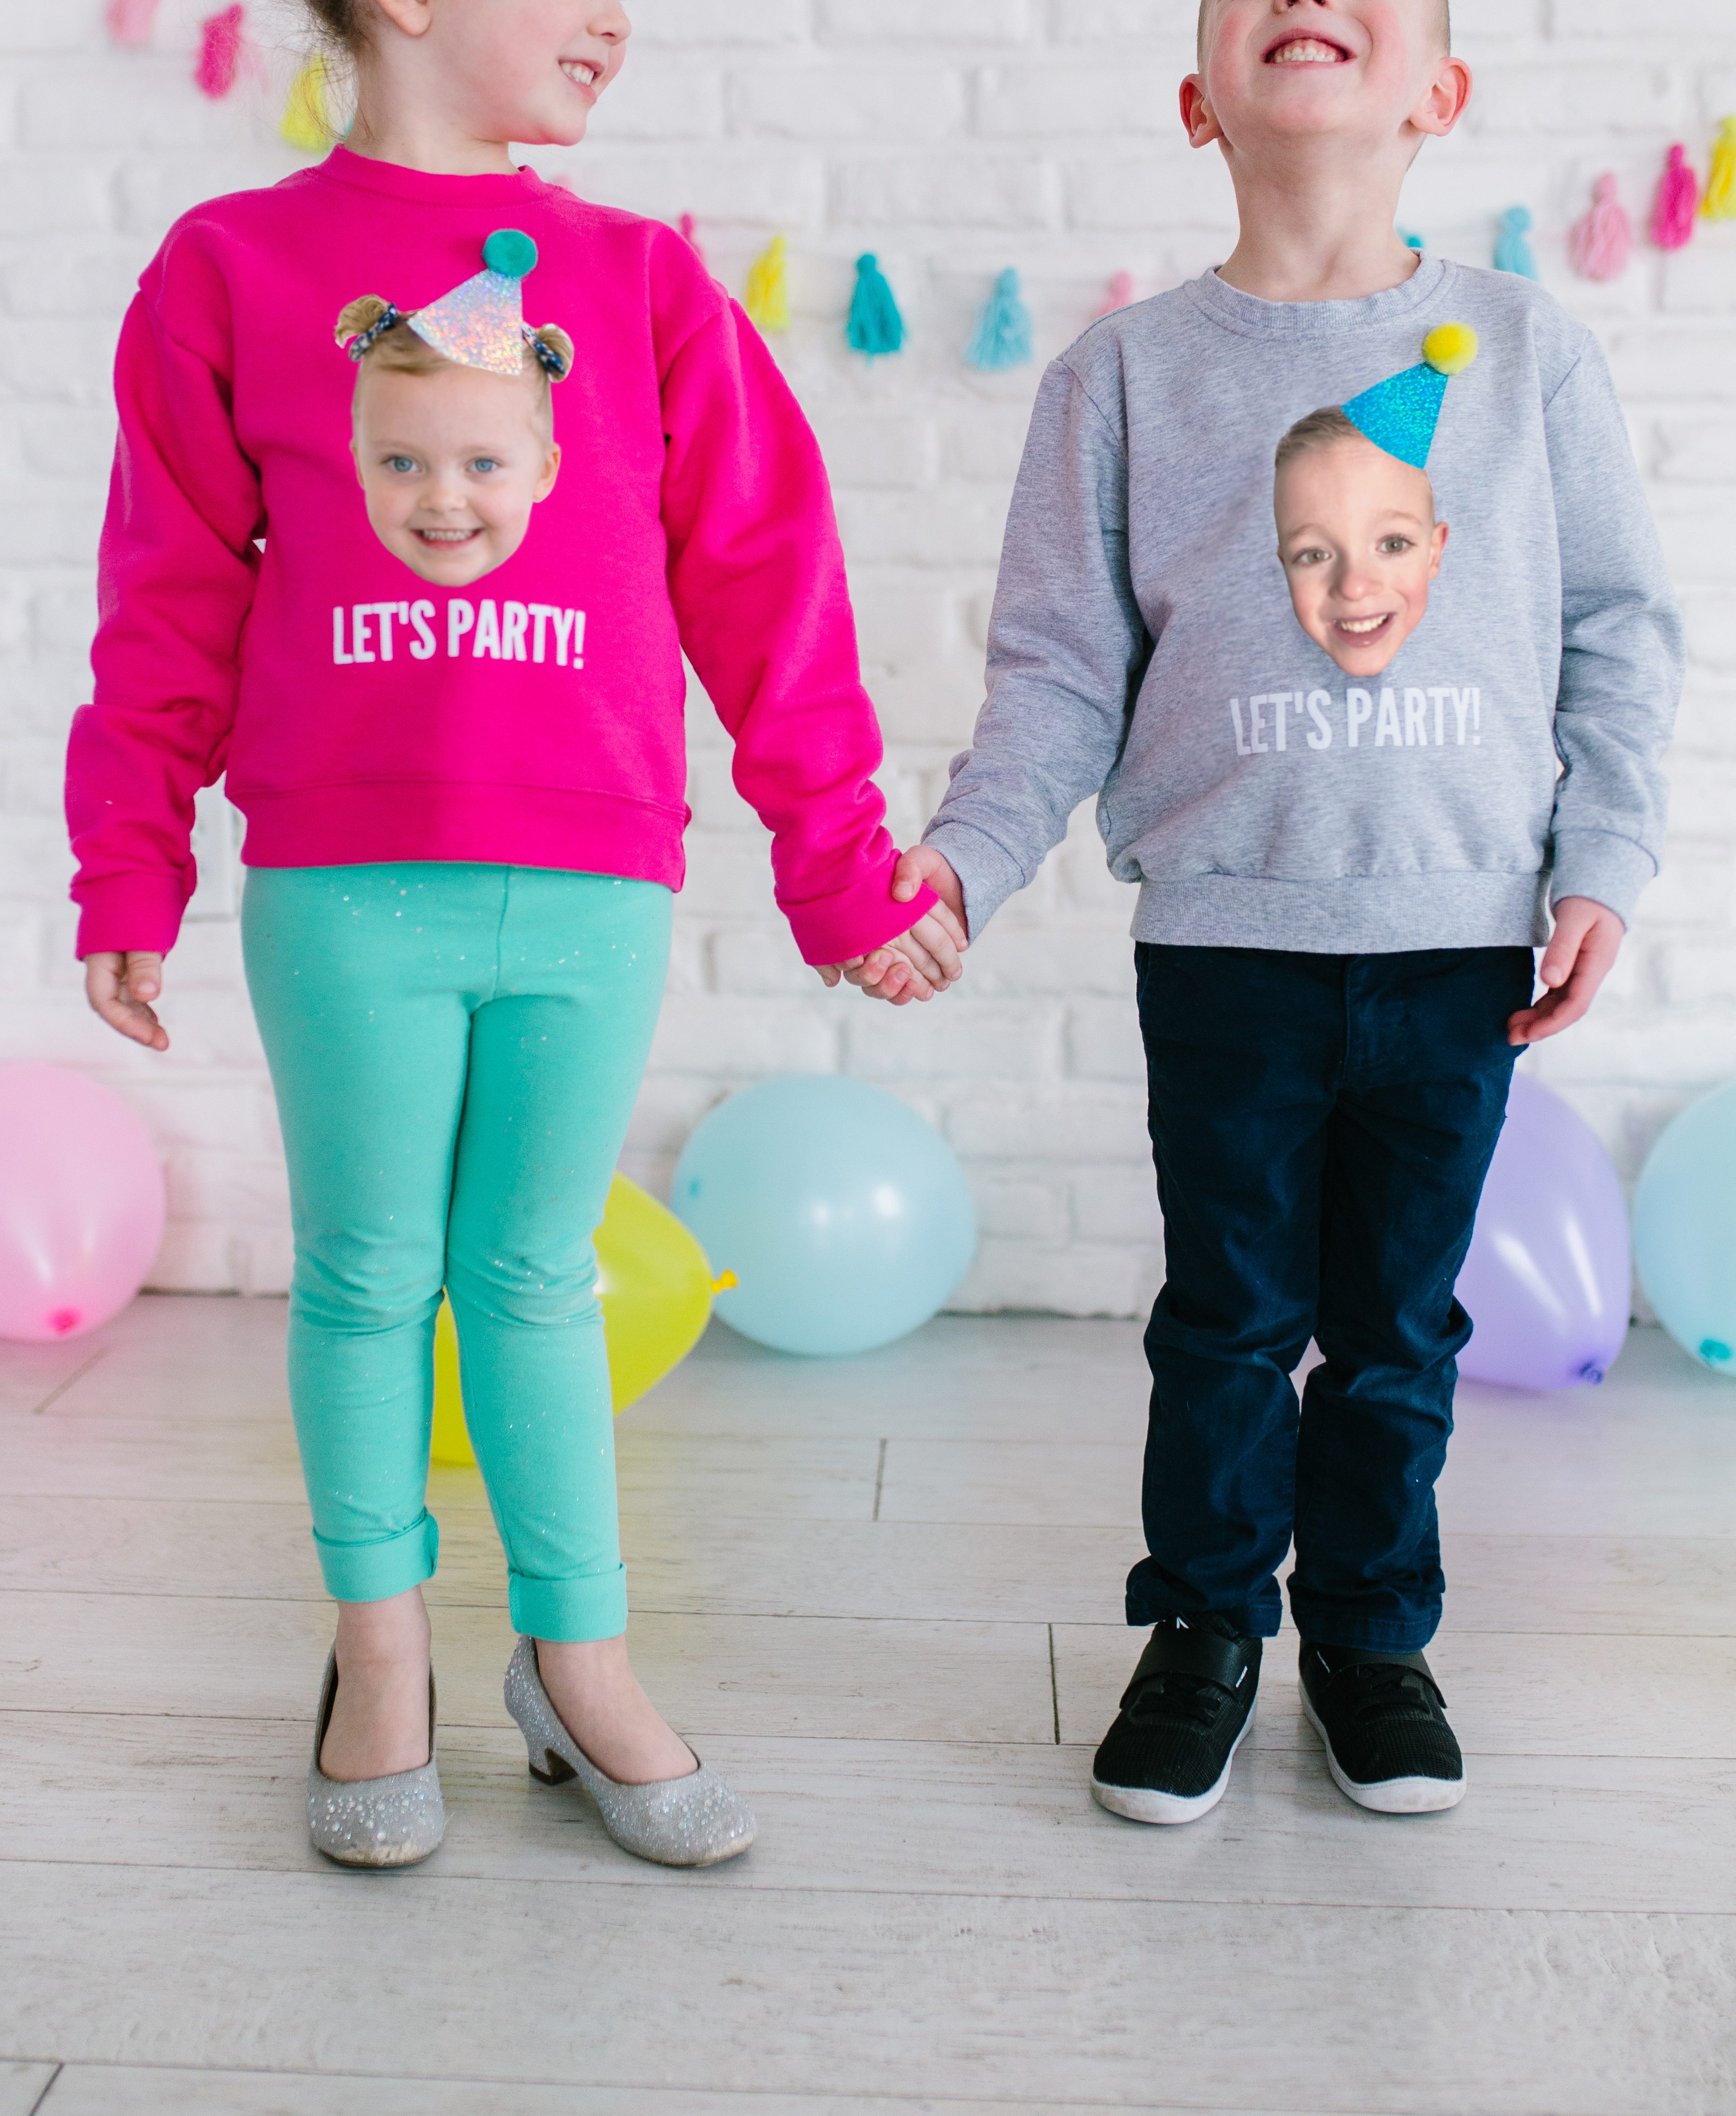 7 DIY Birthday Party Essentials You Can Make by Yourself + a tutorial featured by Top US Craft Blog + The Pretty Life Girls: DIY Birthday Shirt Using Photoshop Elements